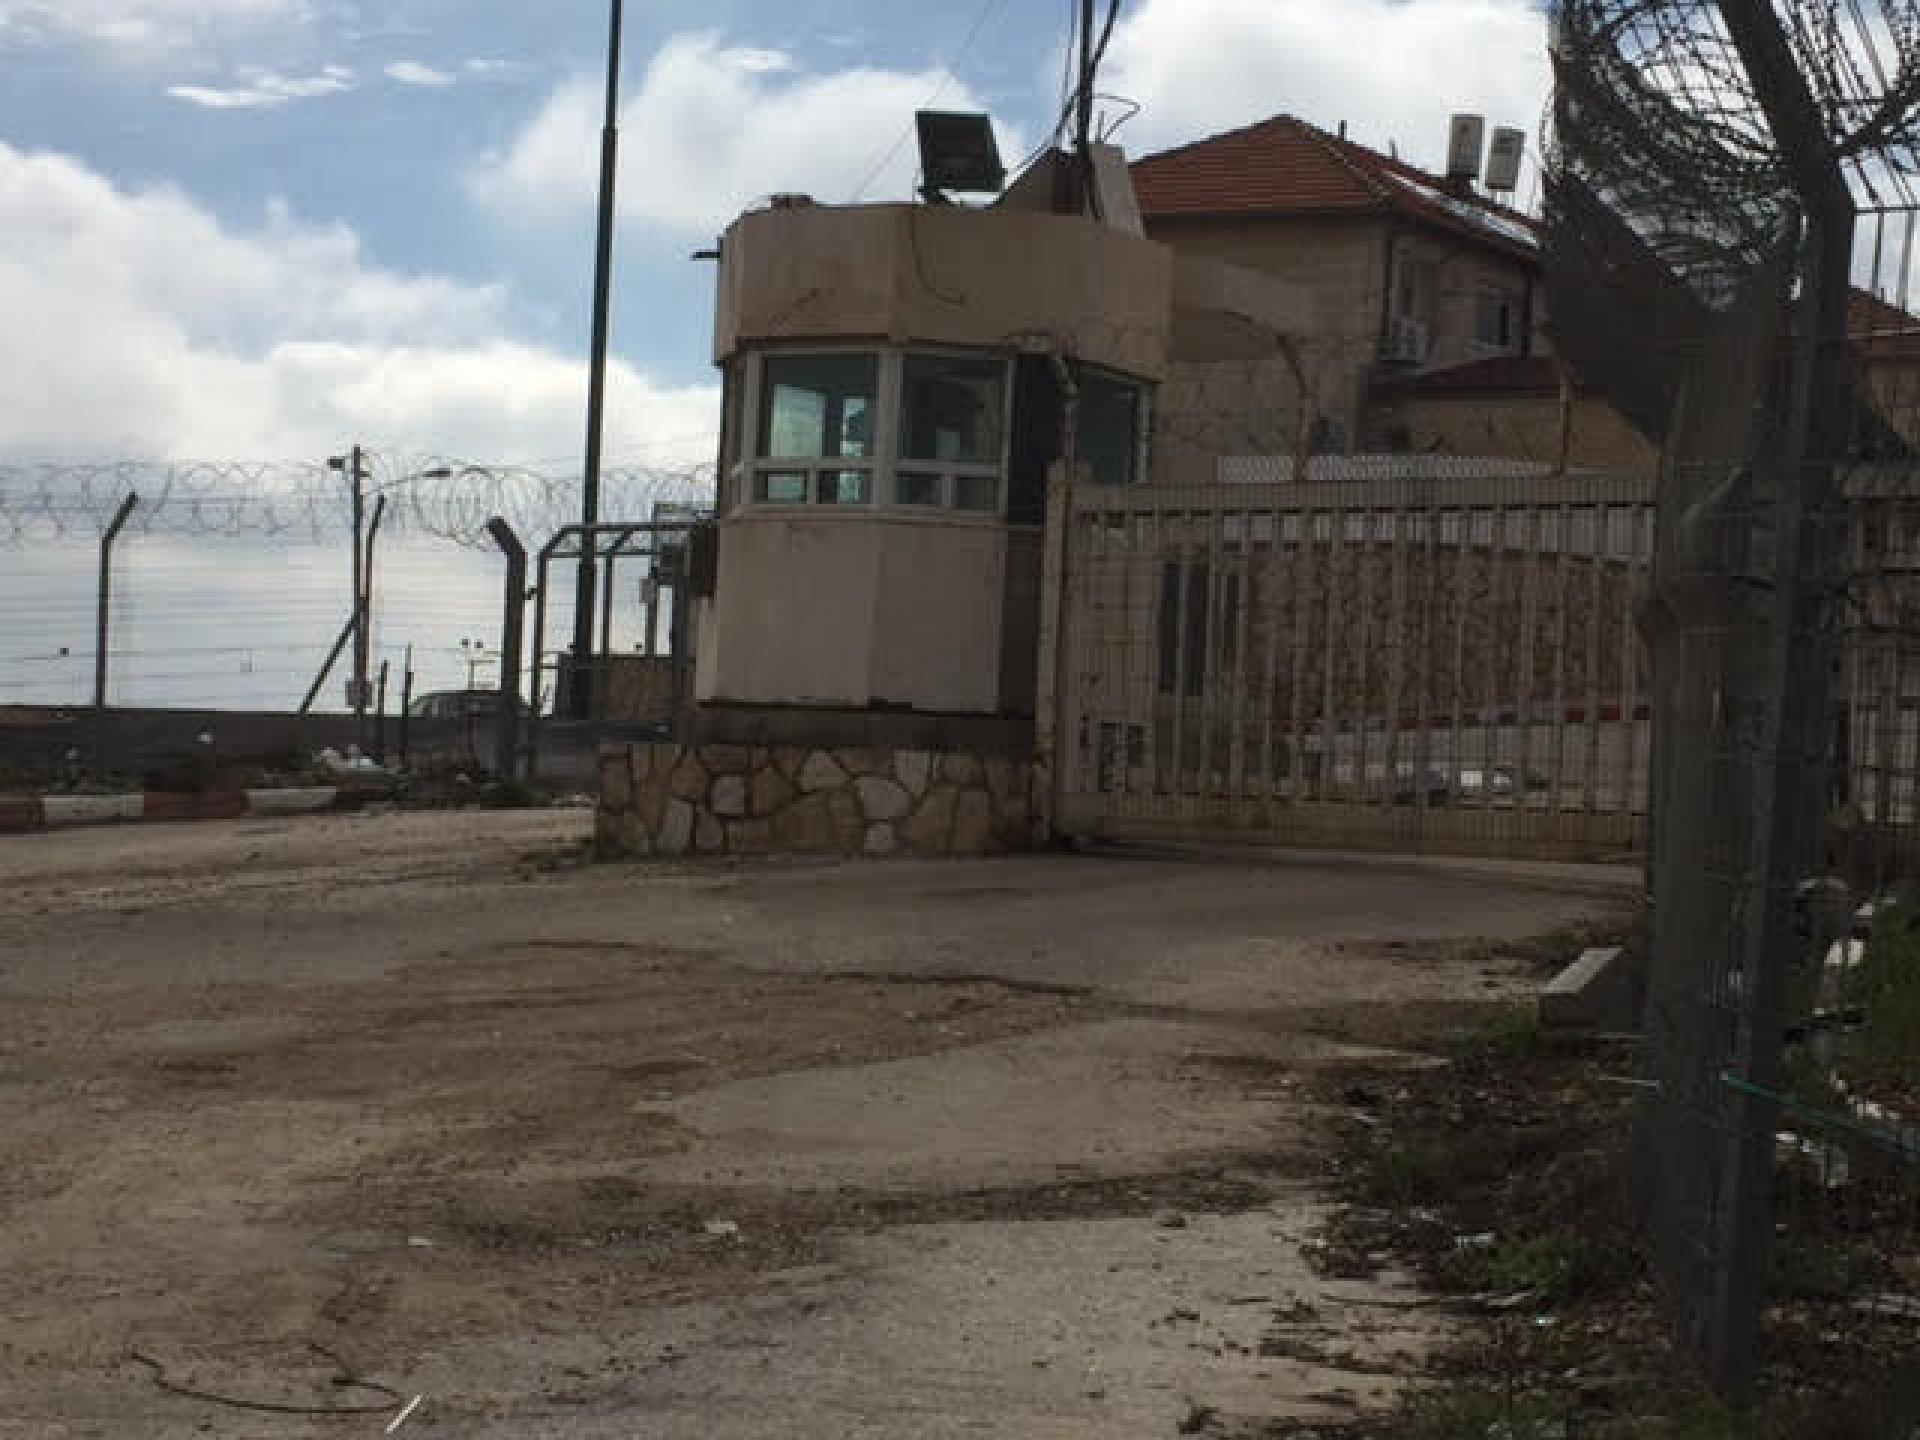 The gate between Hebron and Kiryat Arba photographed from area H1